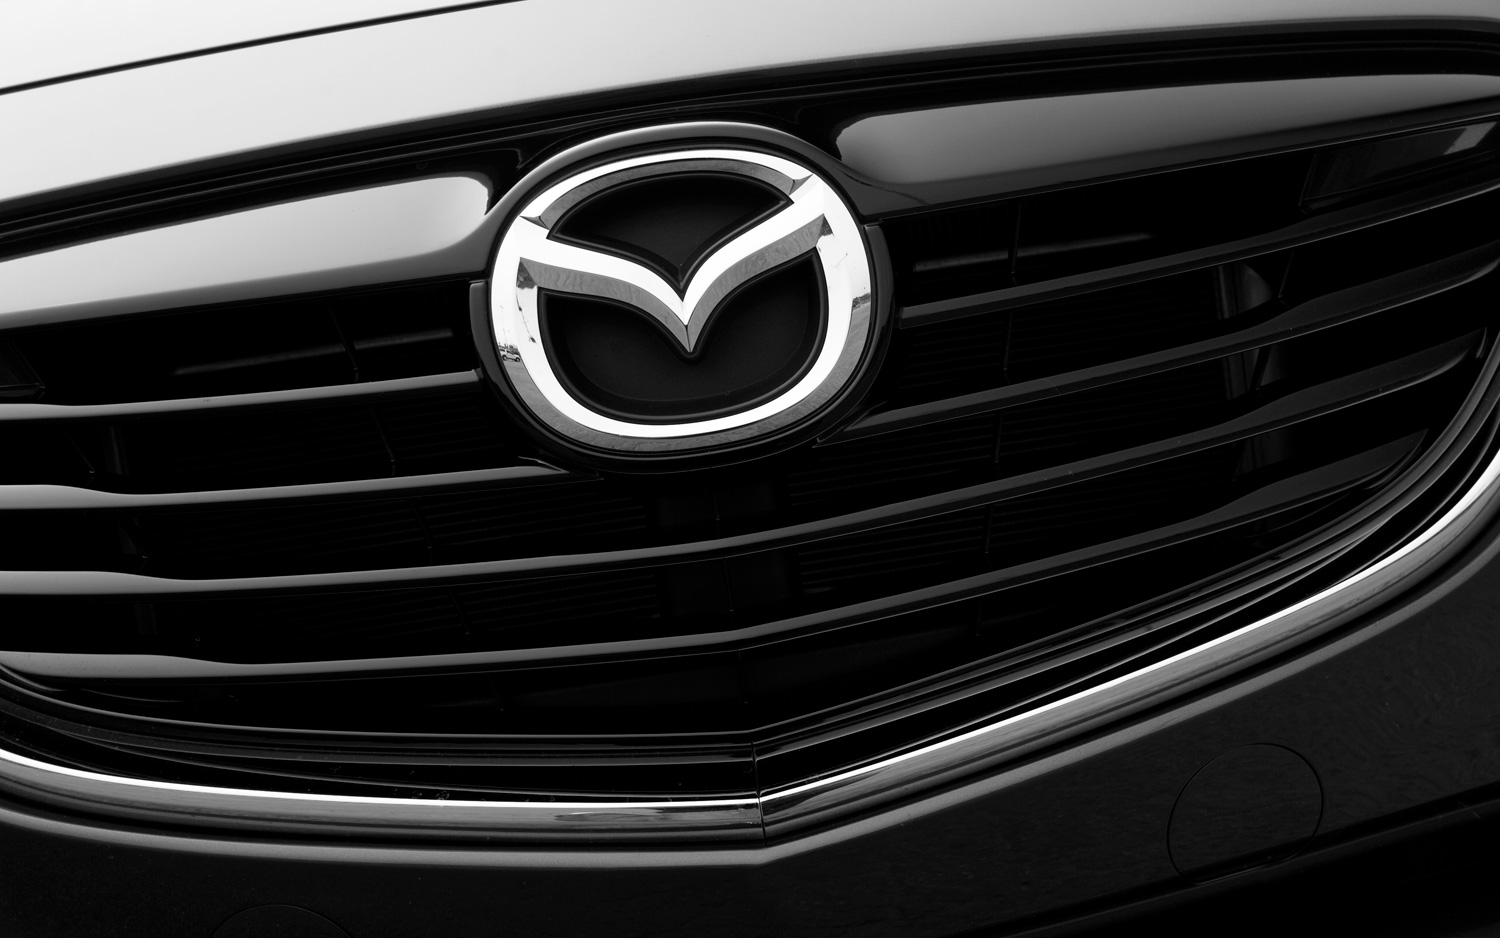 2013-Mazda-CX-9-Grand-Touring-front-grille